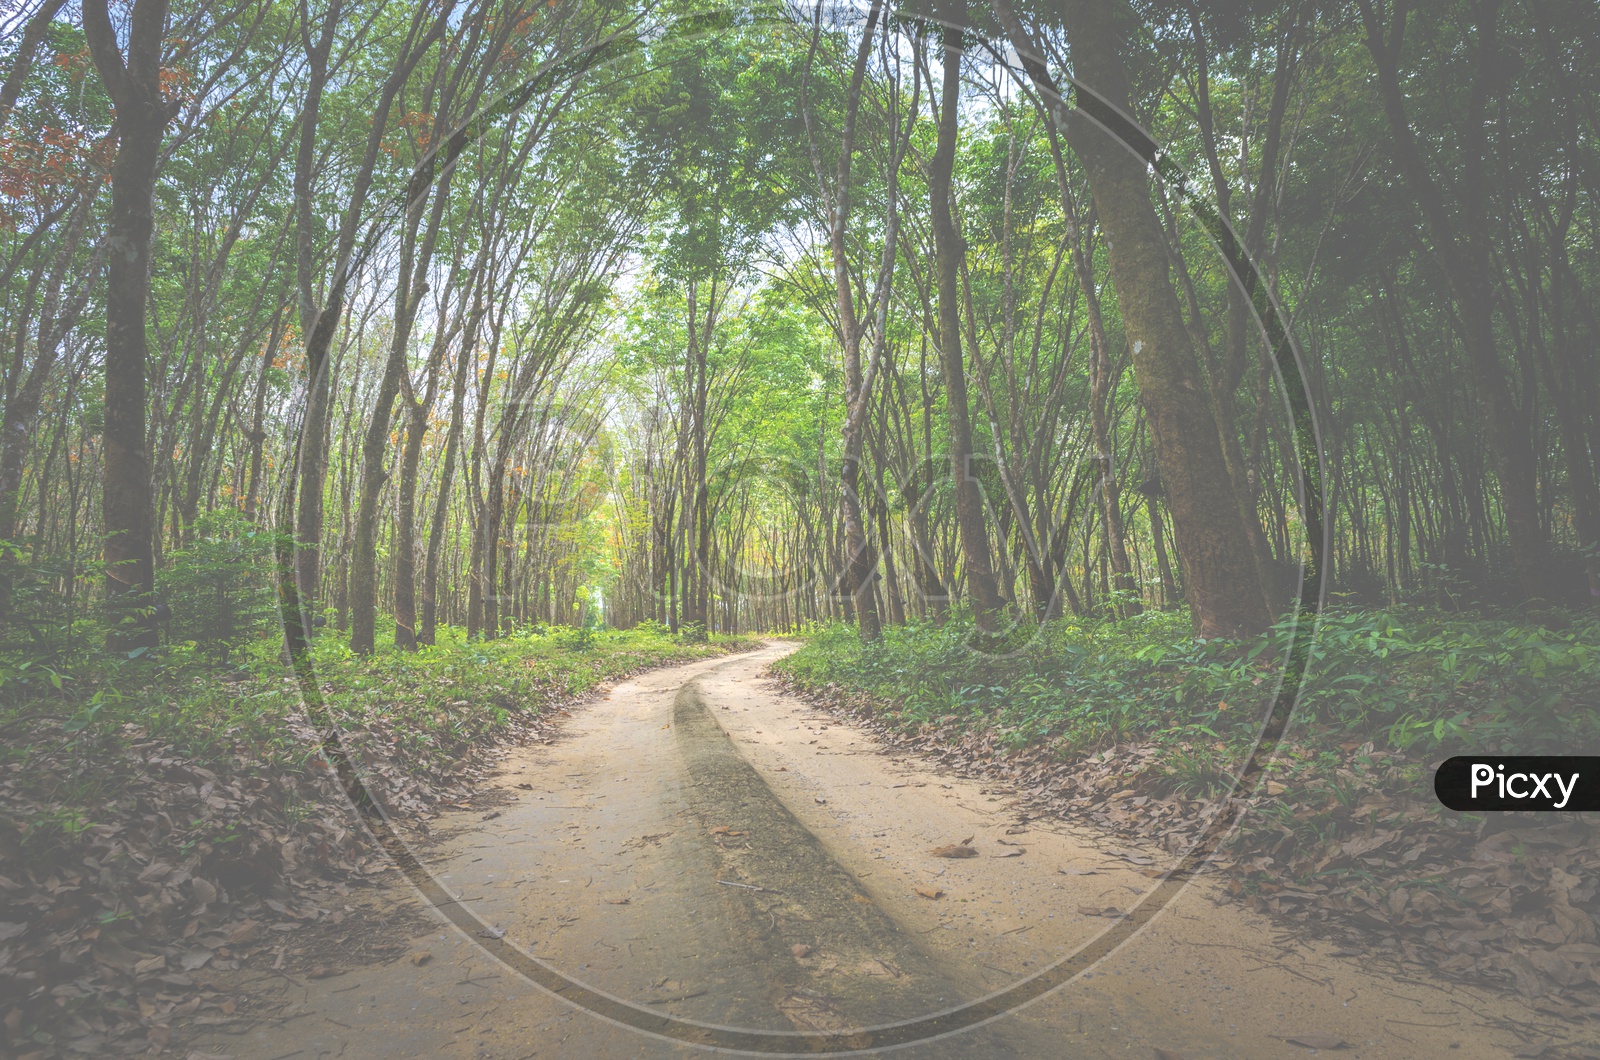 A View Of Pathways With Vehicle Tire Marks in Rubber Plantations With Rubber Trees On Both Sides With vintage Filter